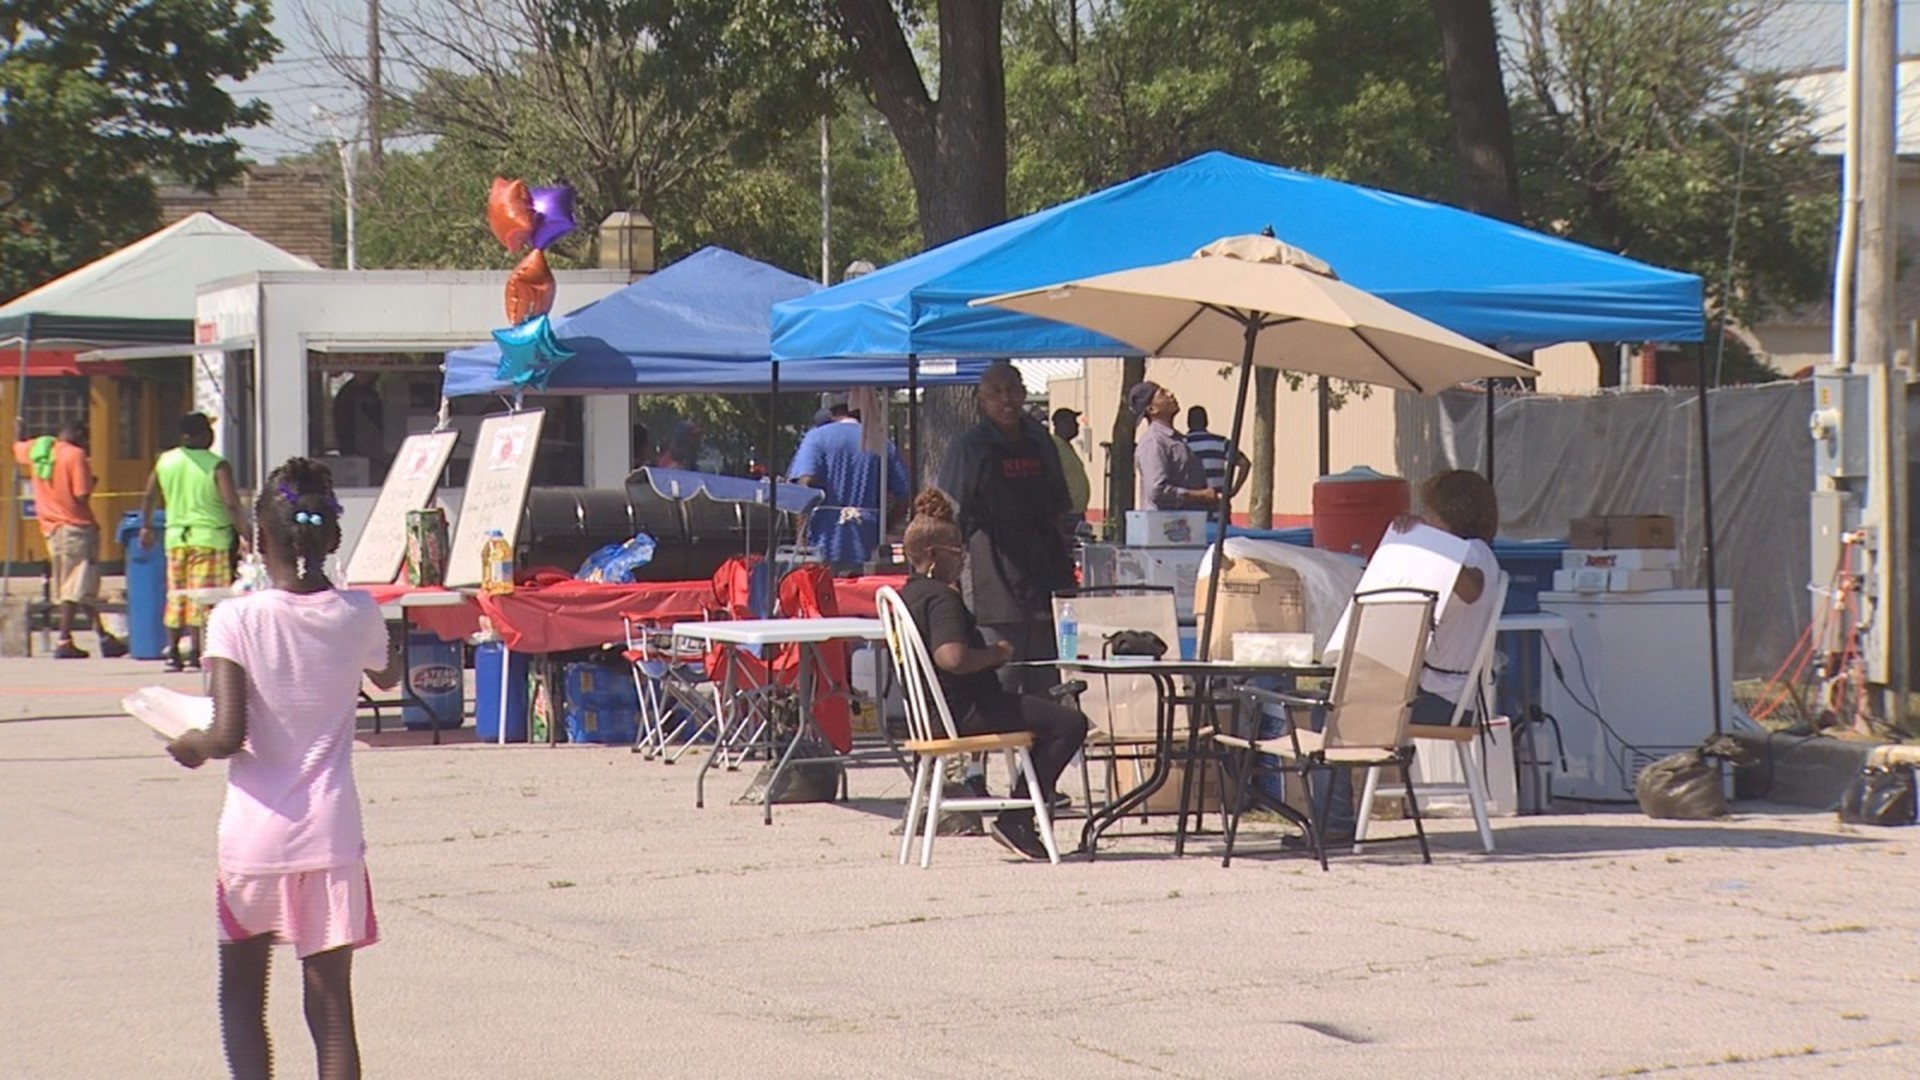 Don't miss Muskegon Heights' "Festival in the Park"